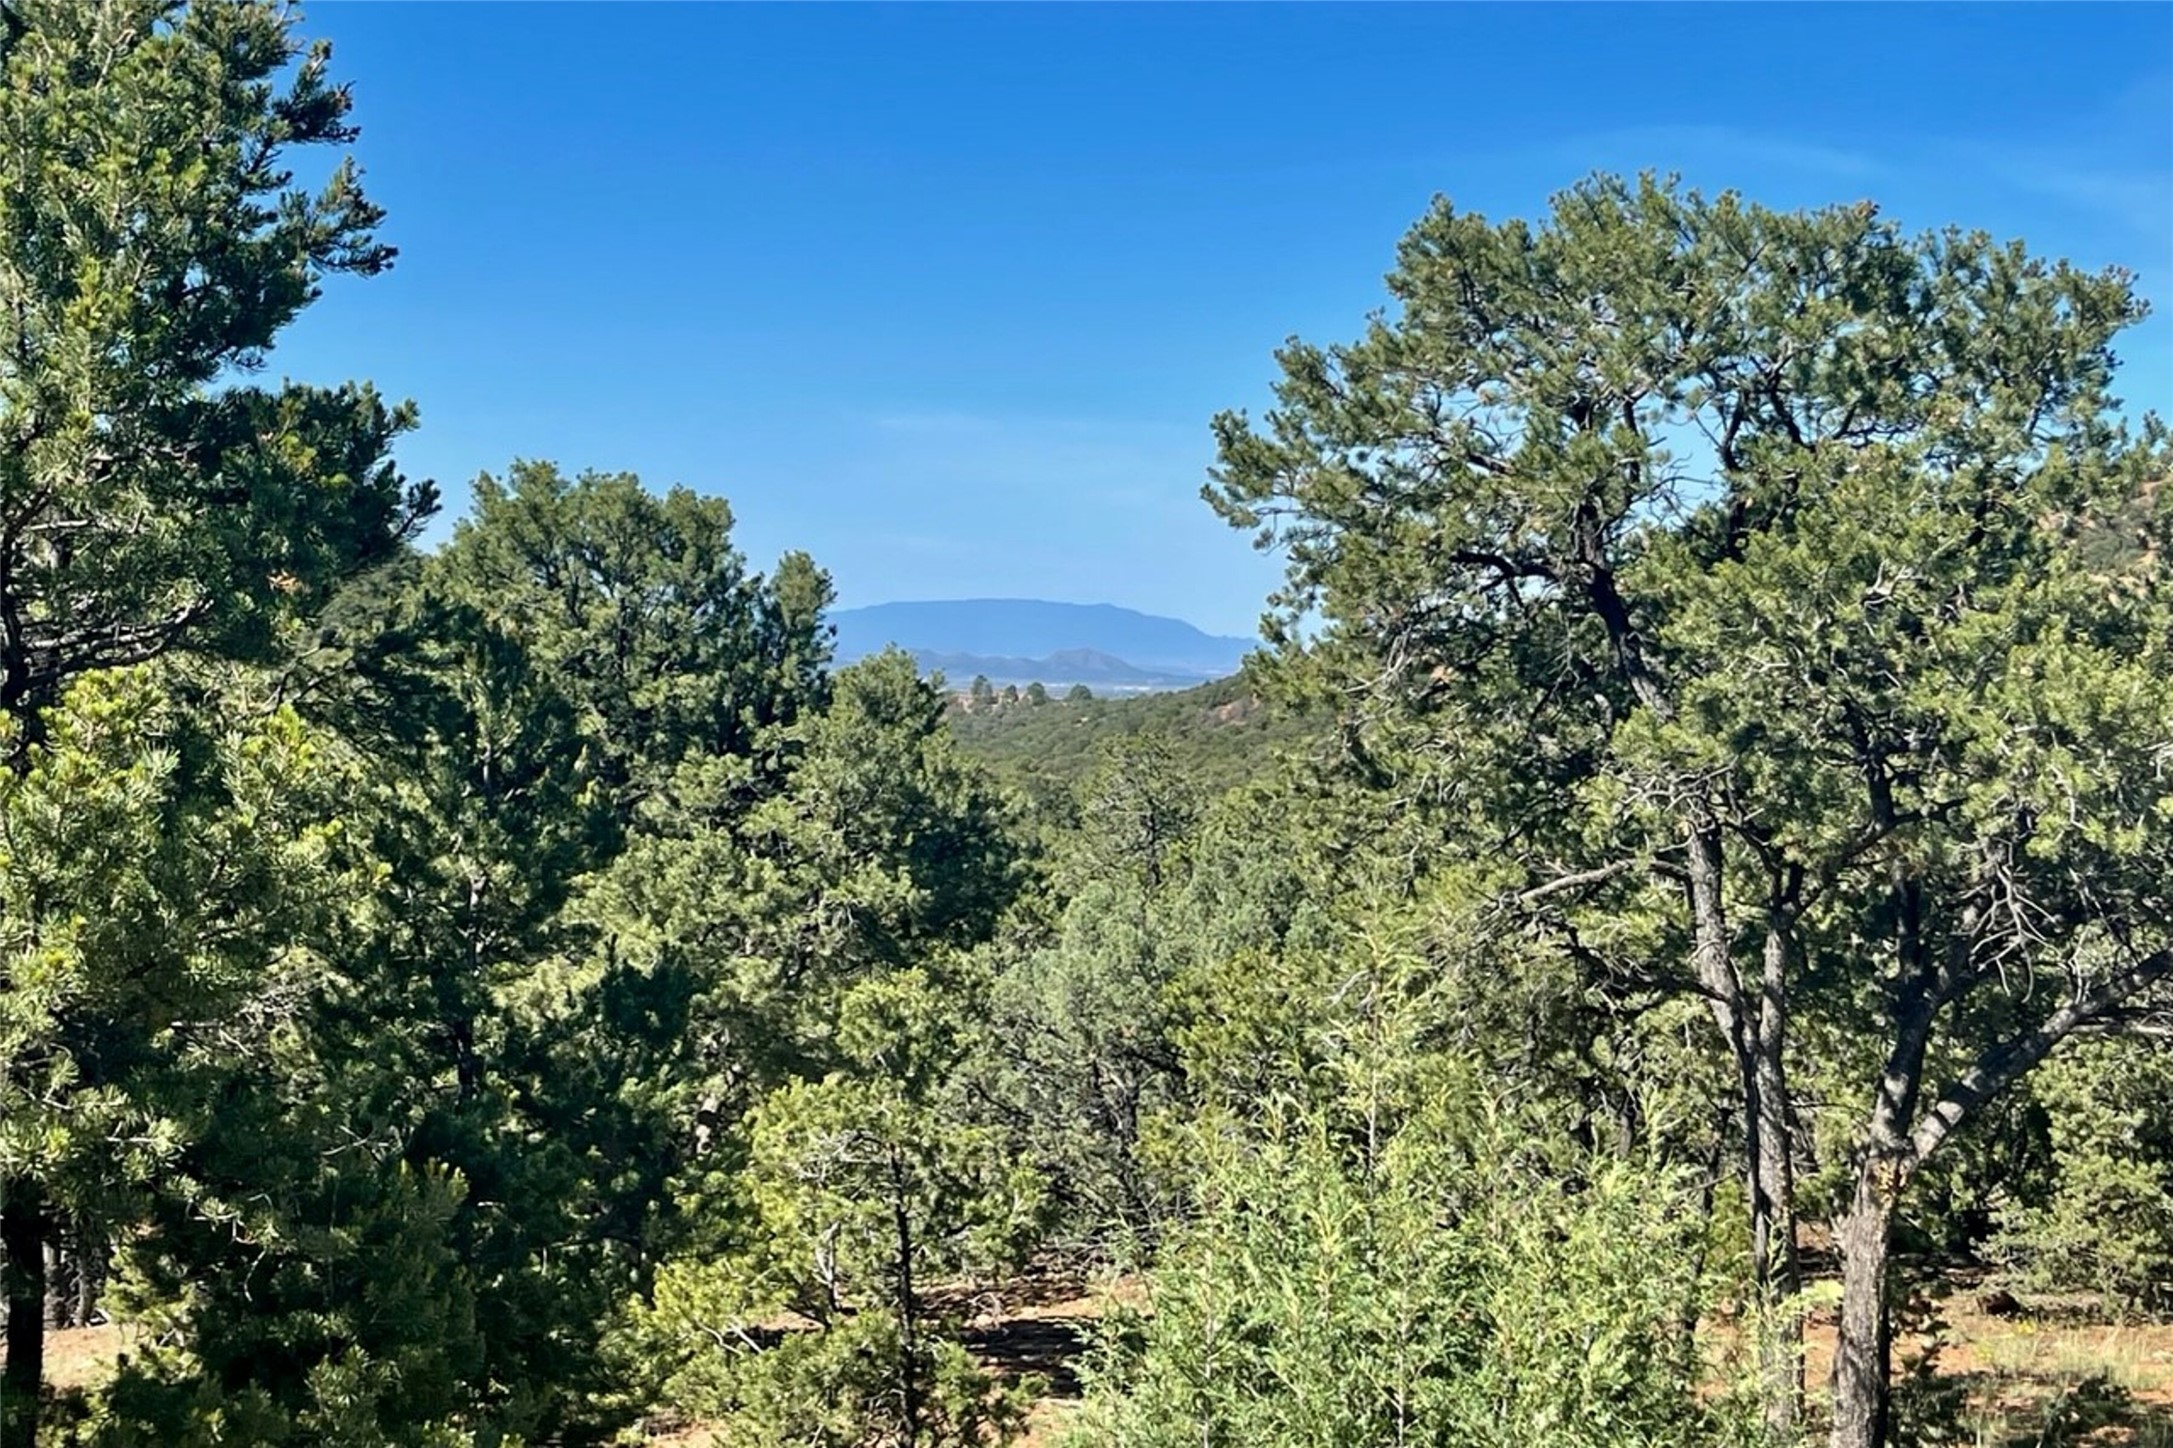 1805 Kachina Heights Lot 2, Santa Fe, New Mexico 87501, 3 Bedrooms Bedrooms, ,3 BathroomsBathrooms,Residential,For Sale,1805 Kachina Heights Lot 2,202234647